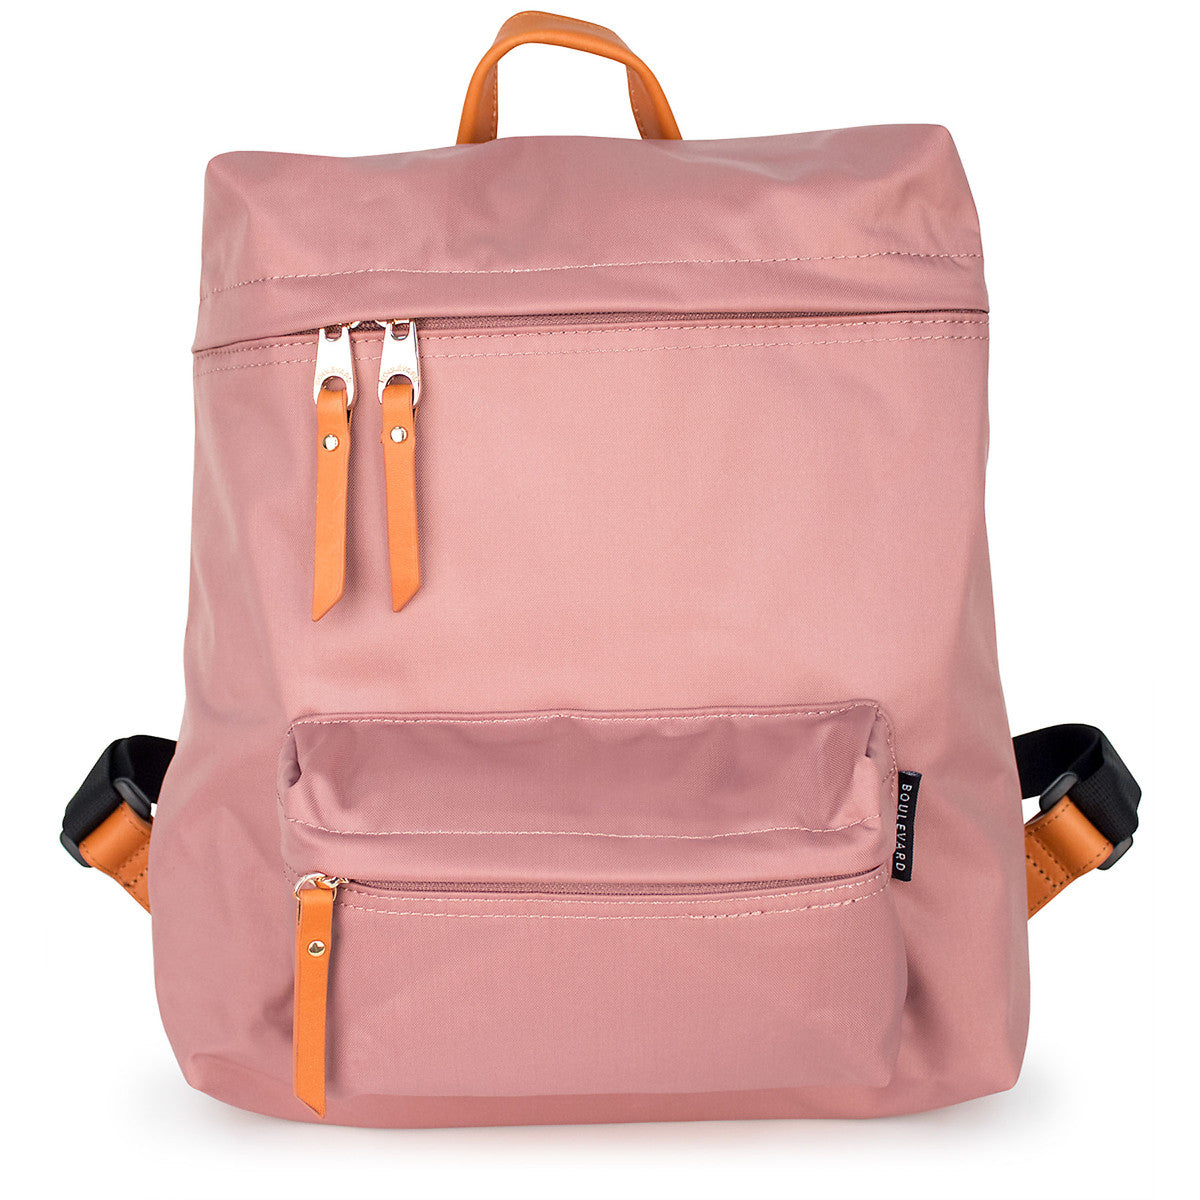 Hailey Backpack - Mauve (Ships in 1-2 Weeks)